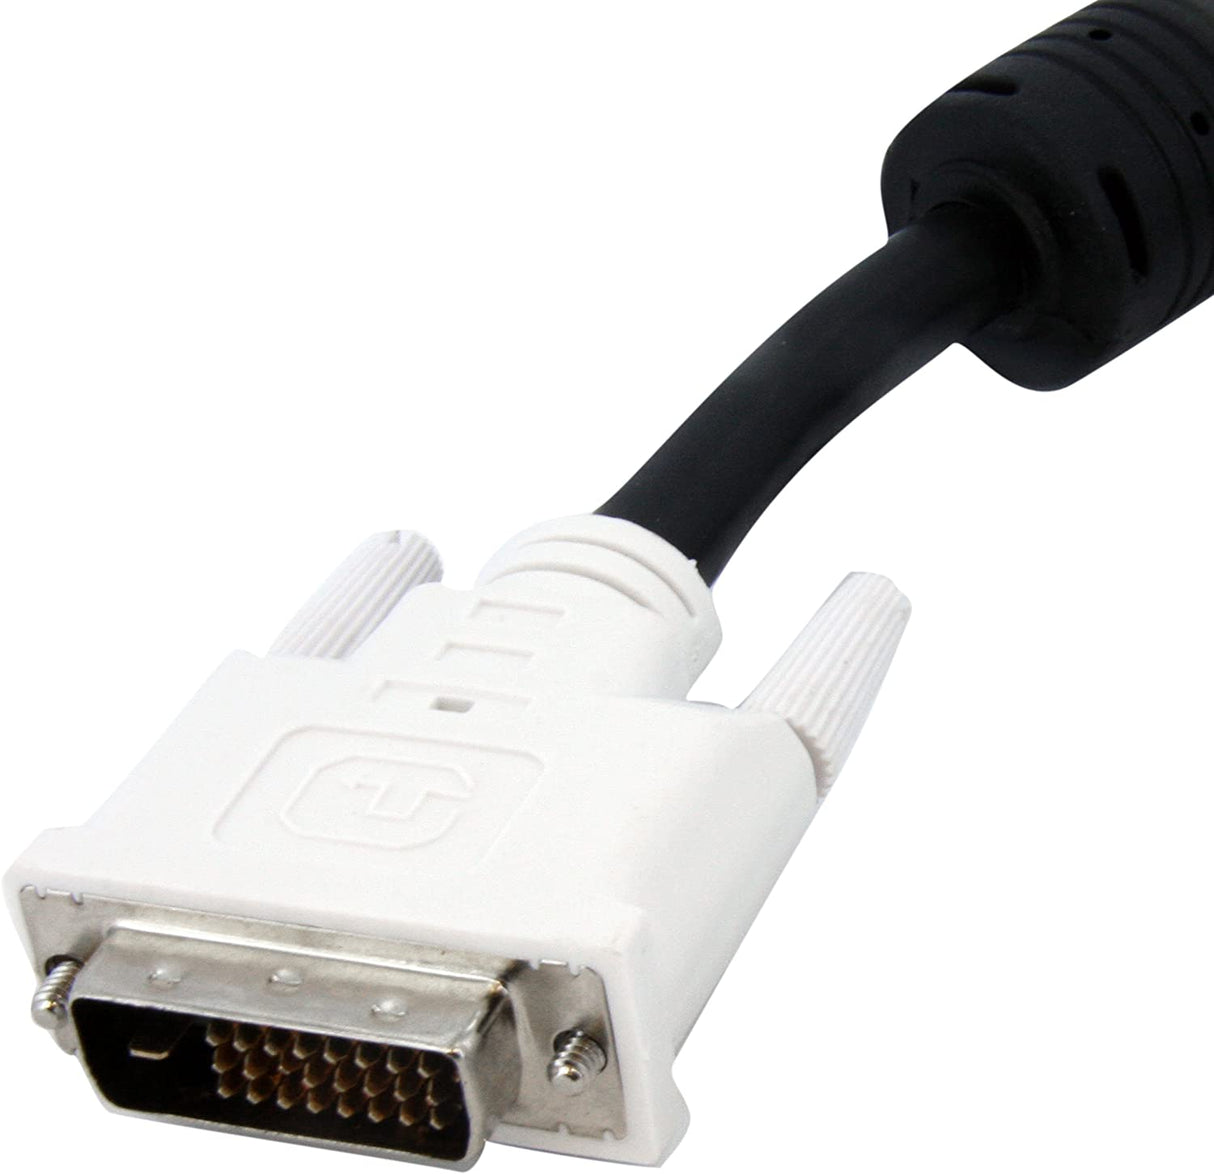 StarTech.com DVI Extension Cable - 10 ft - Dual Link - Male to Female Cable - 2560x1600 - DVI-D Cable - Computer Monitor Cable - DVI Cord (DVIDDMF10) 10 ft / 3m